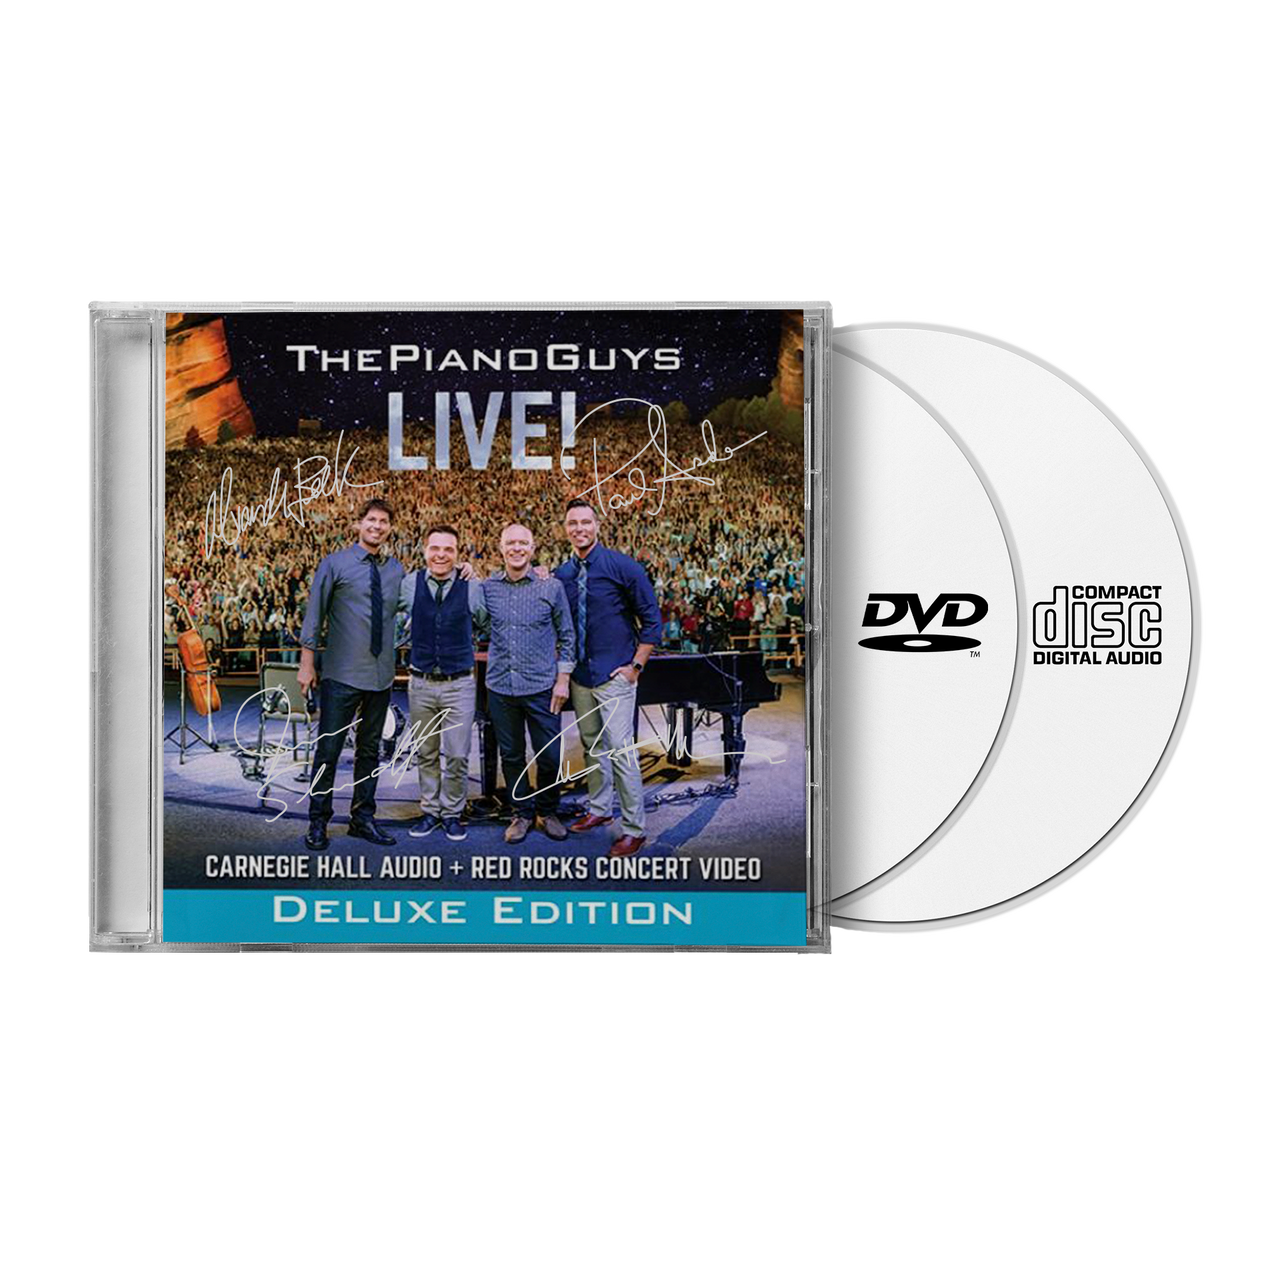 The Piano Guys "LIVE!"